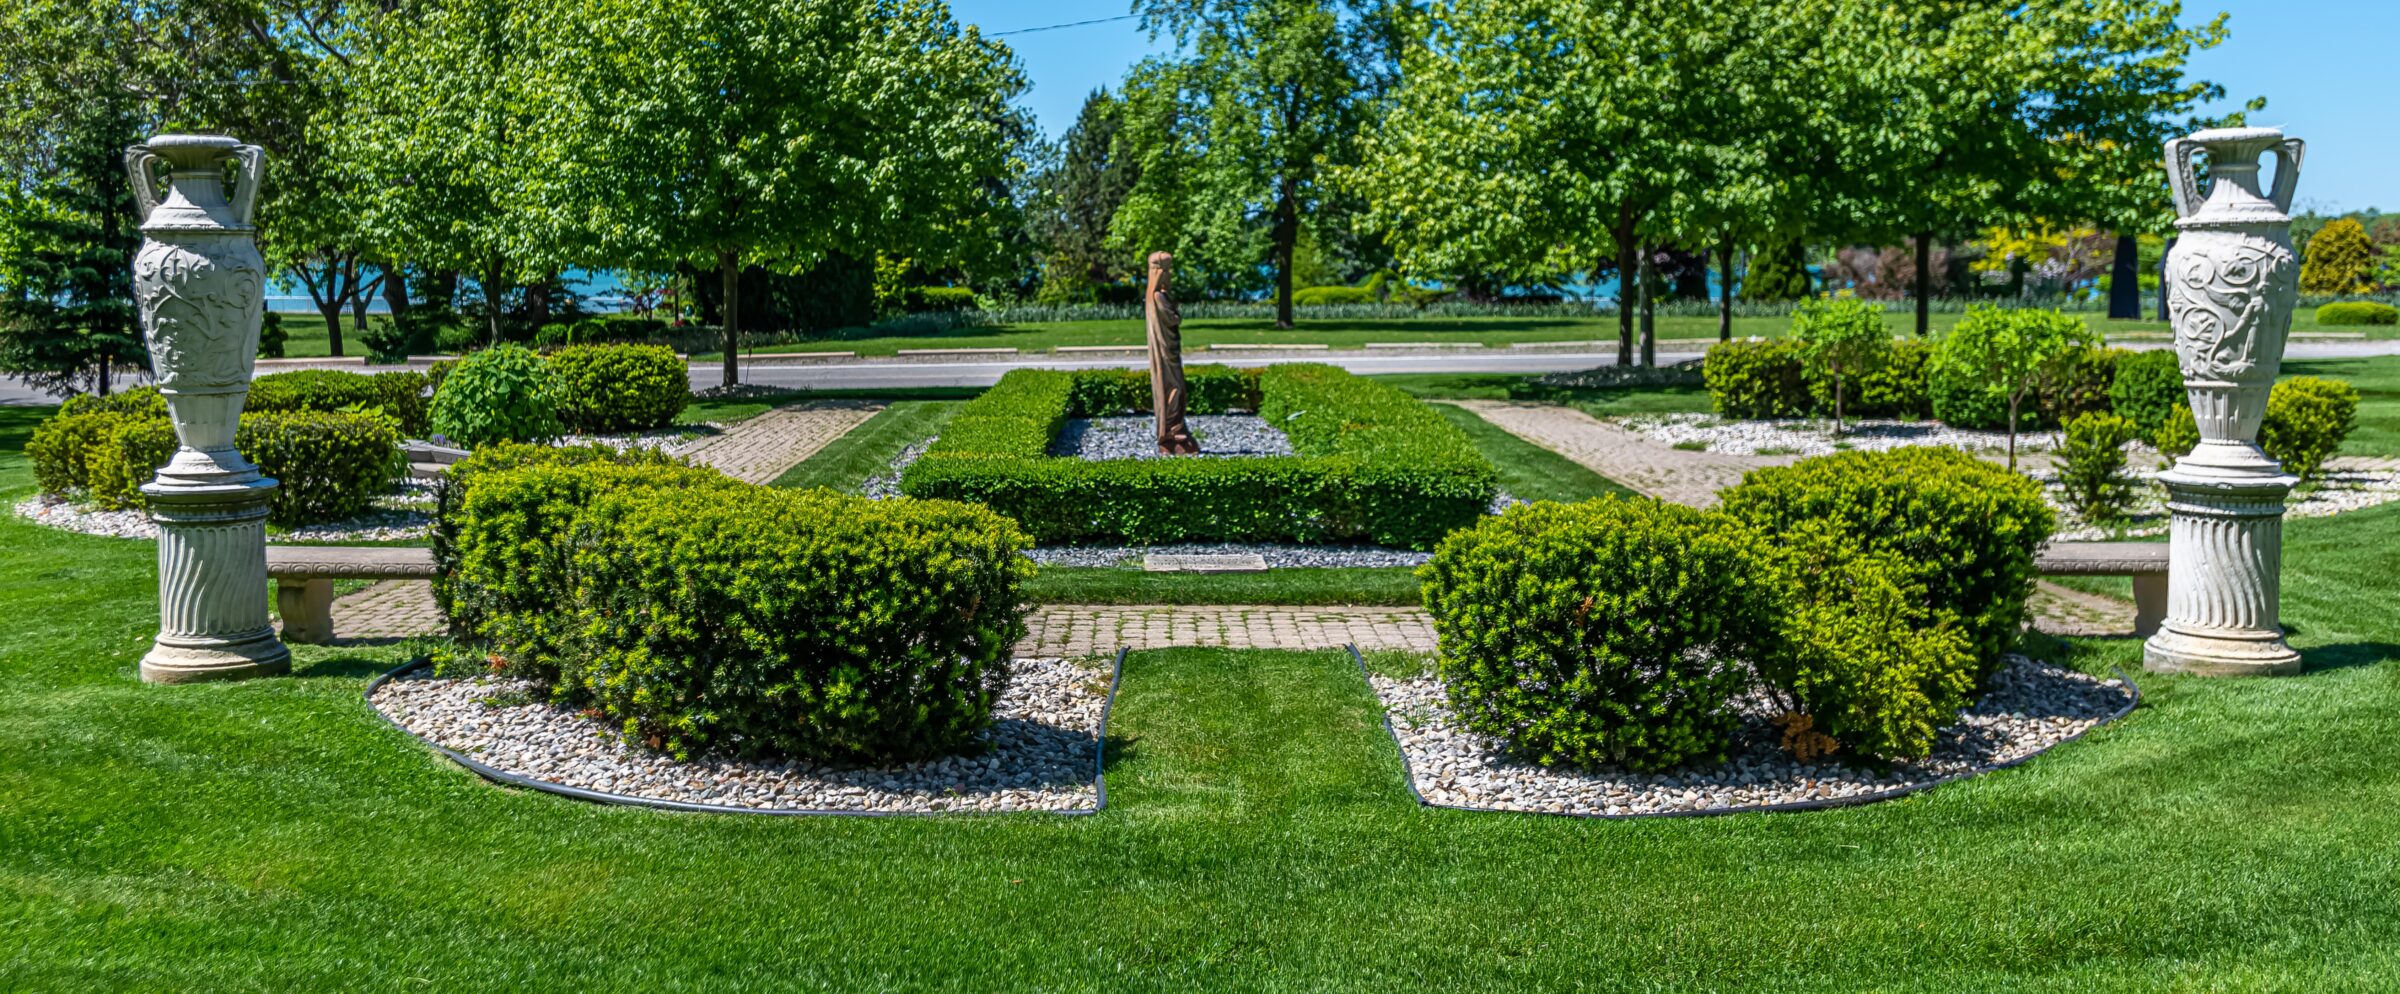 This image shows a symmetrical formal garden with sculpted shrubs, ornate urns, brick pathways, a central statue, under a clear blue sky.